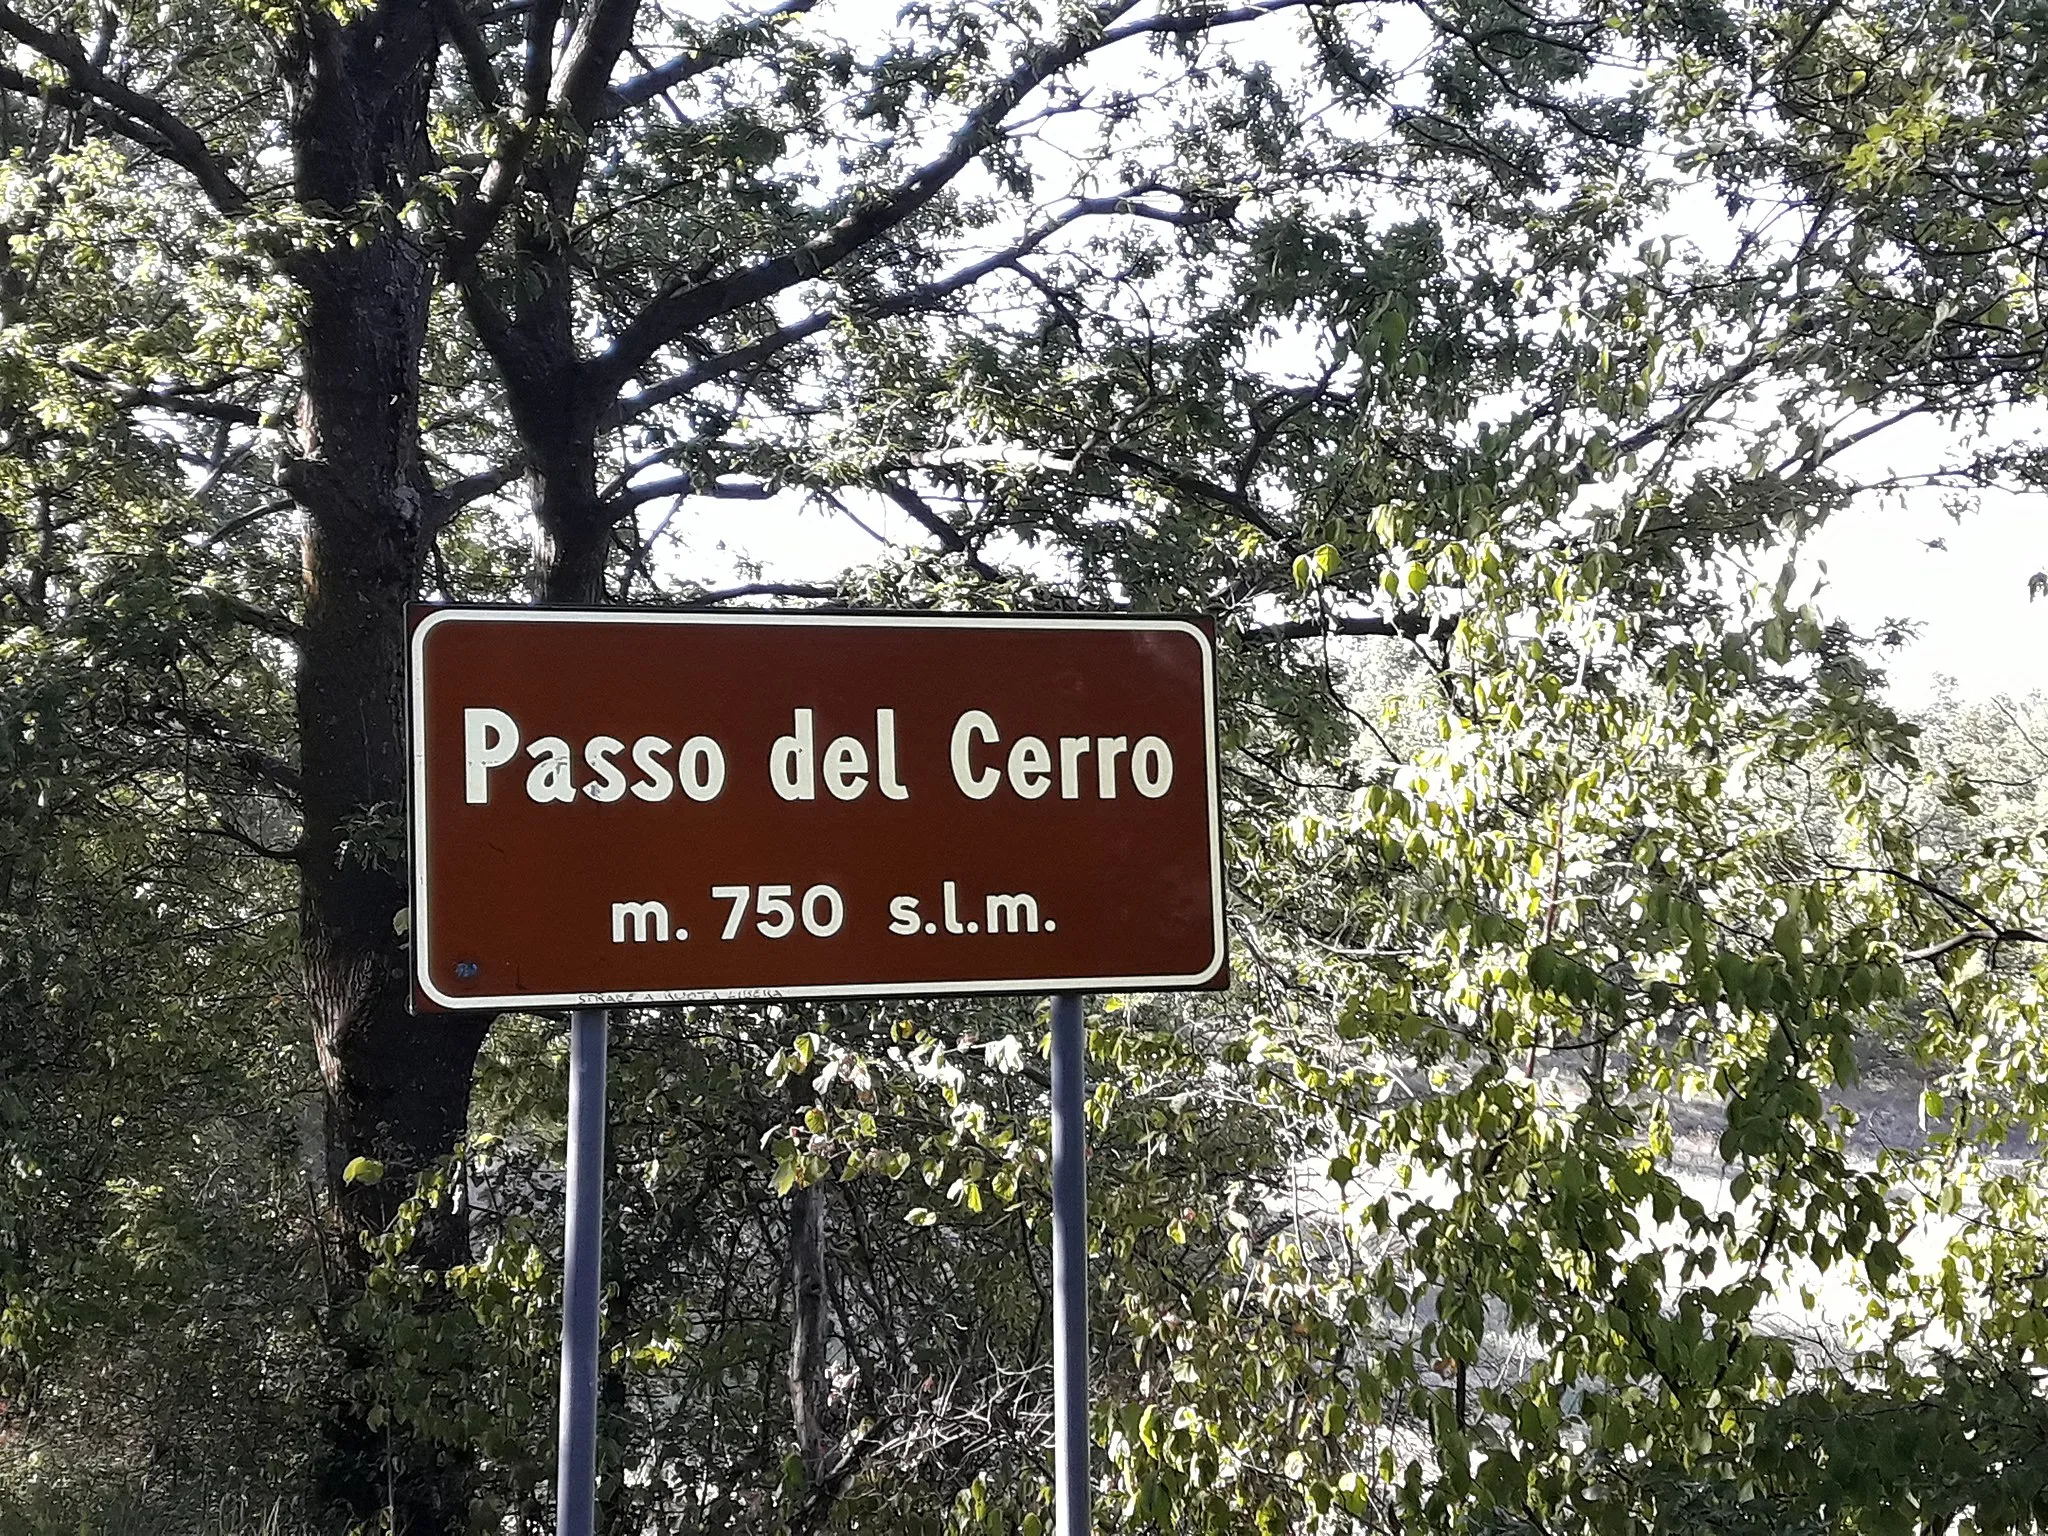 Photo showing: Cartel on the top of Cerro pass, municipality of Bettola, Piacenza, Italy